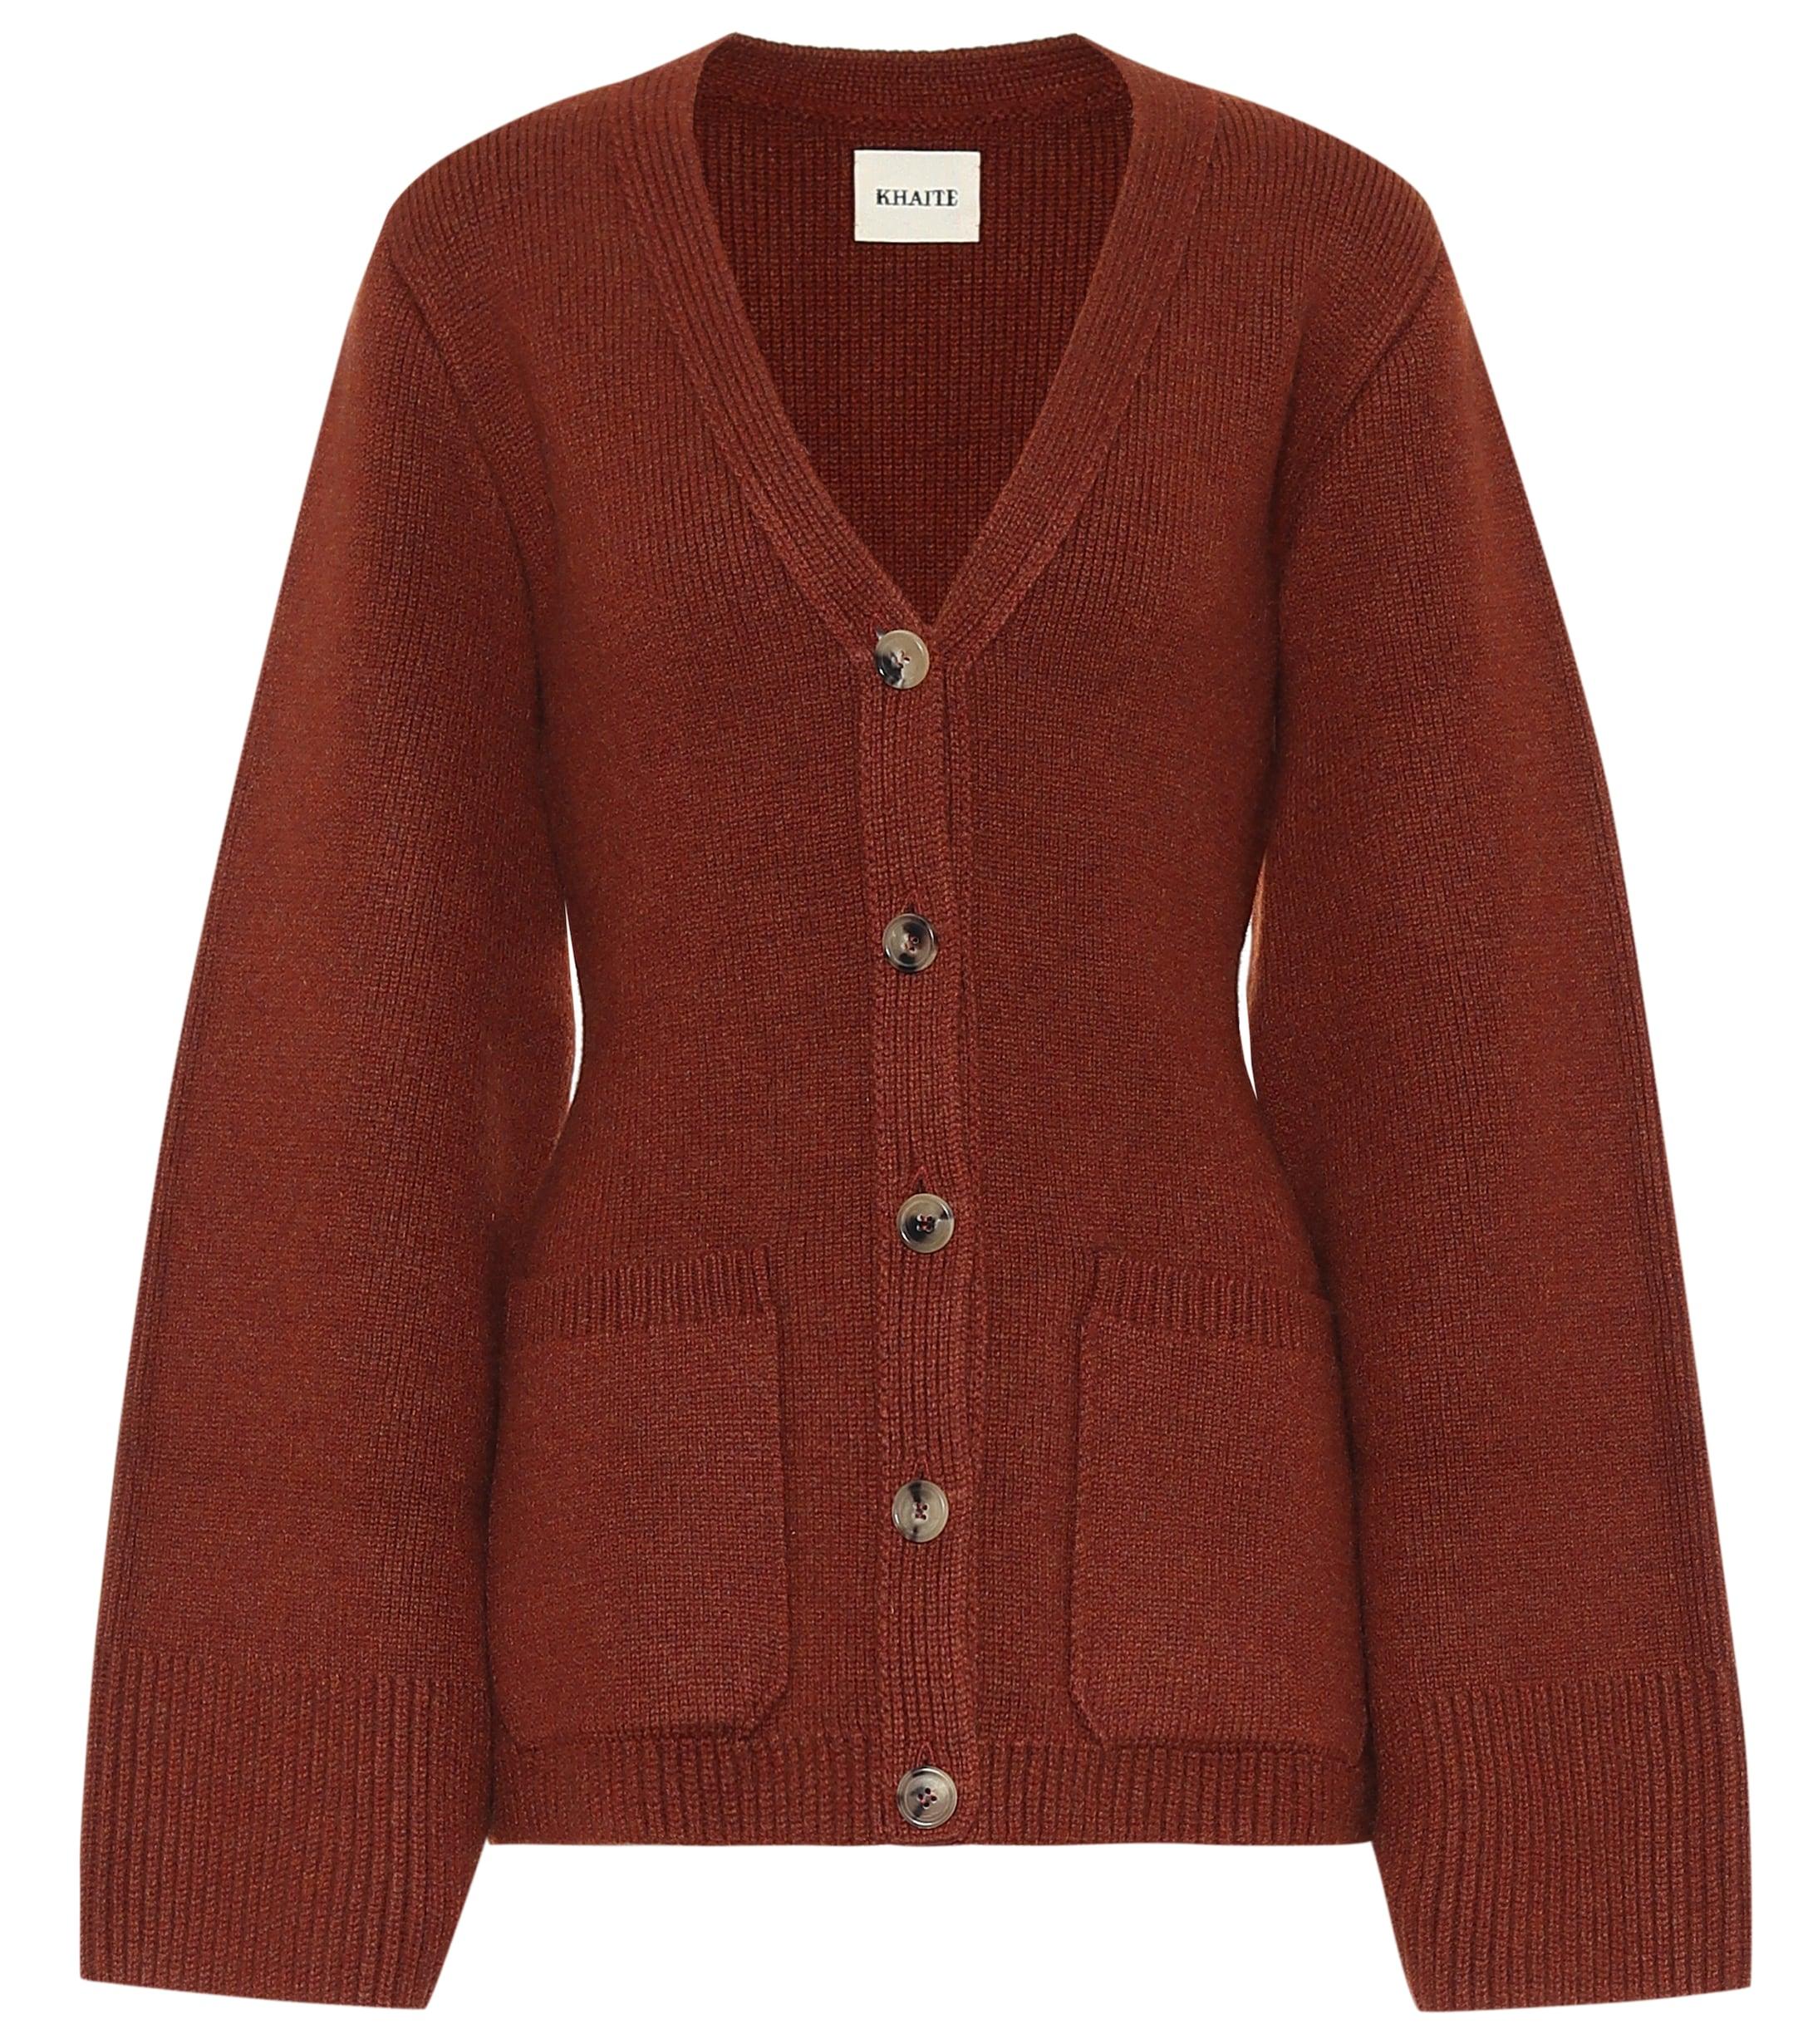 Khaite Lucy Stretch-cashmere Cardigan in Red - Lyst